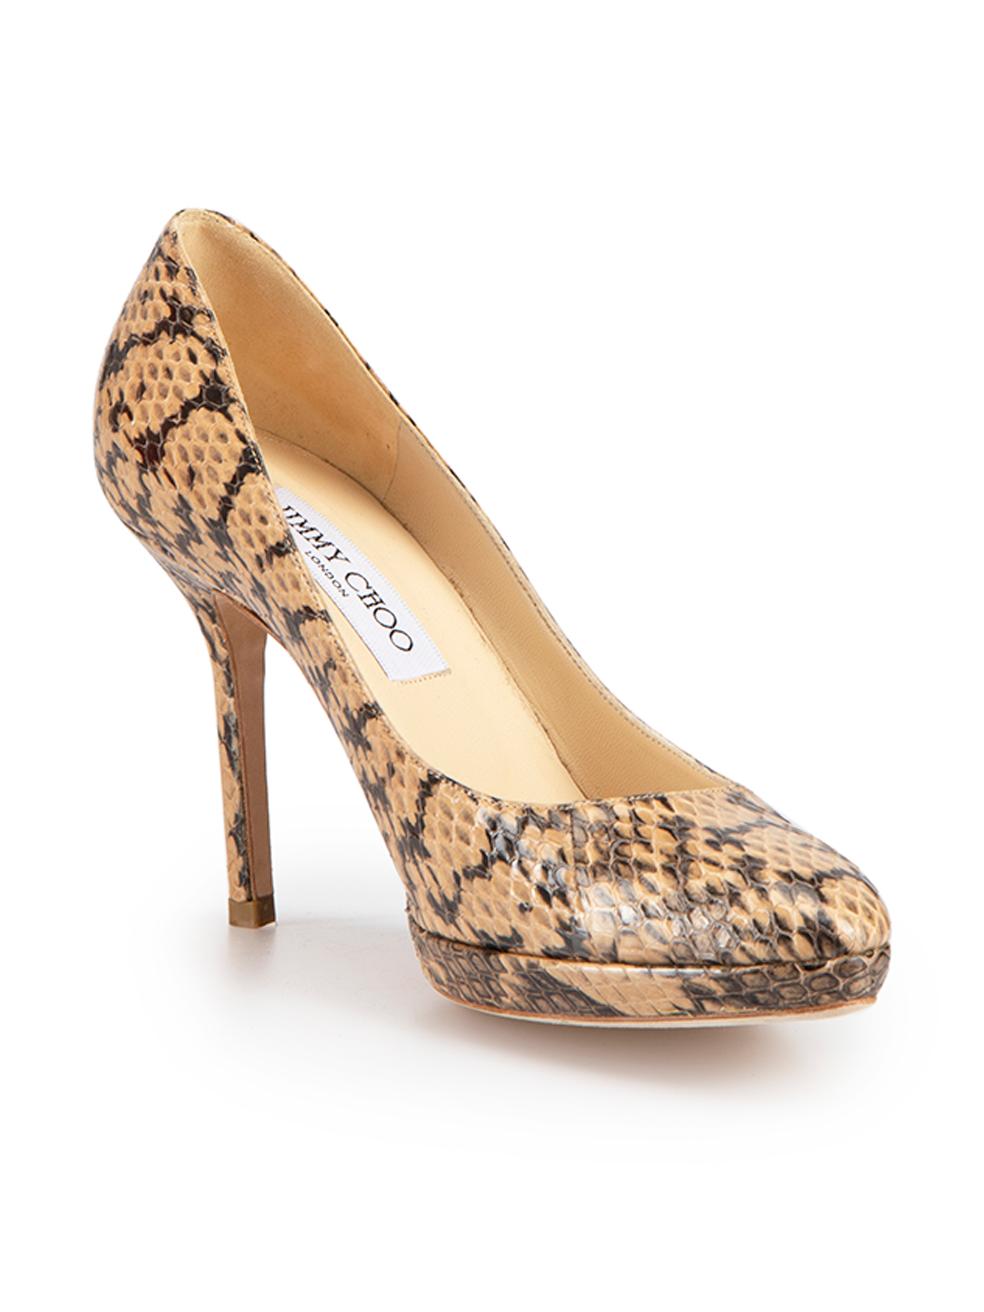 CONDITION is Very good. Minimal wear to shoes is evident. Minimal wear to left shoe with scuff to the heel-stem and mark to the right-side on this used Jimmy Choo designer resale item.



Details


Beige & black

Snakeskin

Slip-on